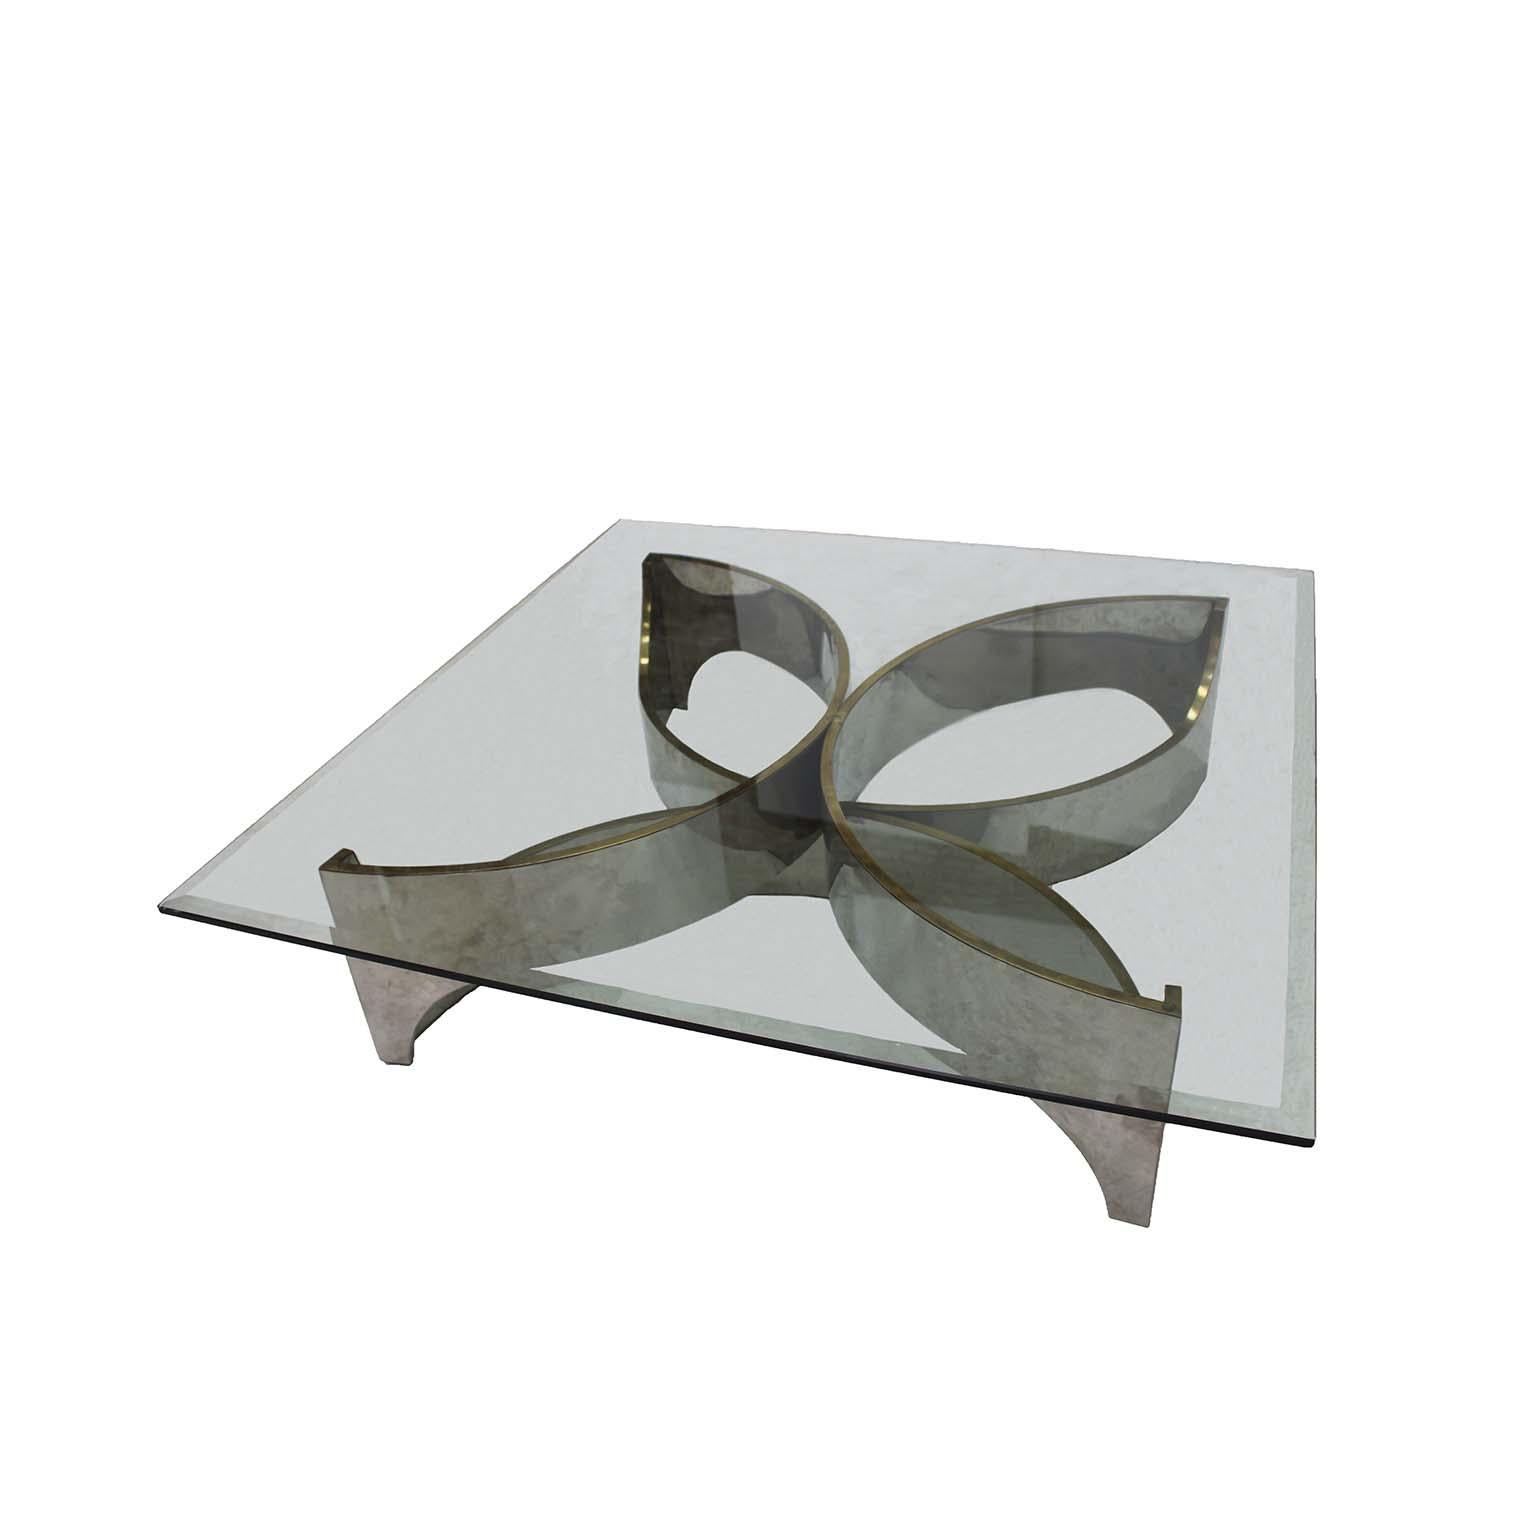 Center table attributed to Frank Stella with flower-shaped chrome metal structure and transparent glass top. USA 80's.

Measurements: W 140 x D 140 x H 35 cm

Every item LA Studio offers is checked by our team of 10 craftsmen in our in-house